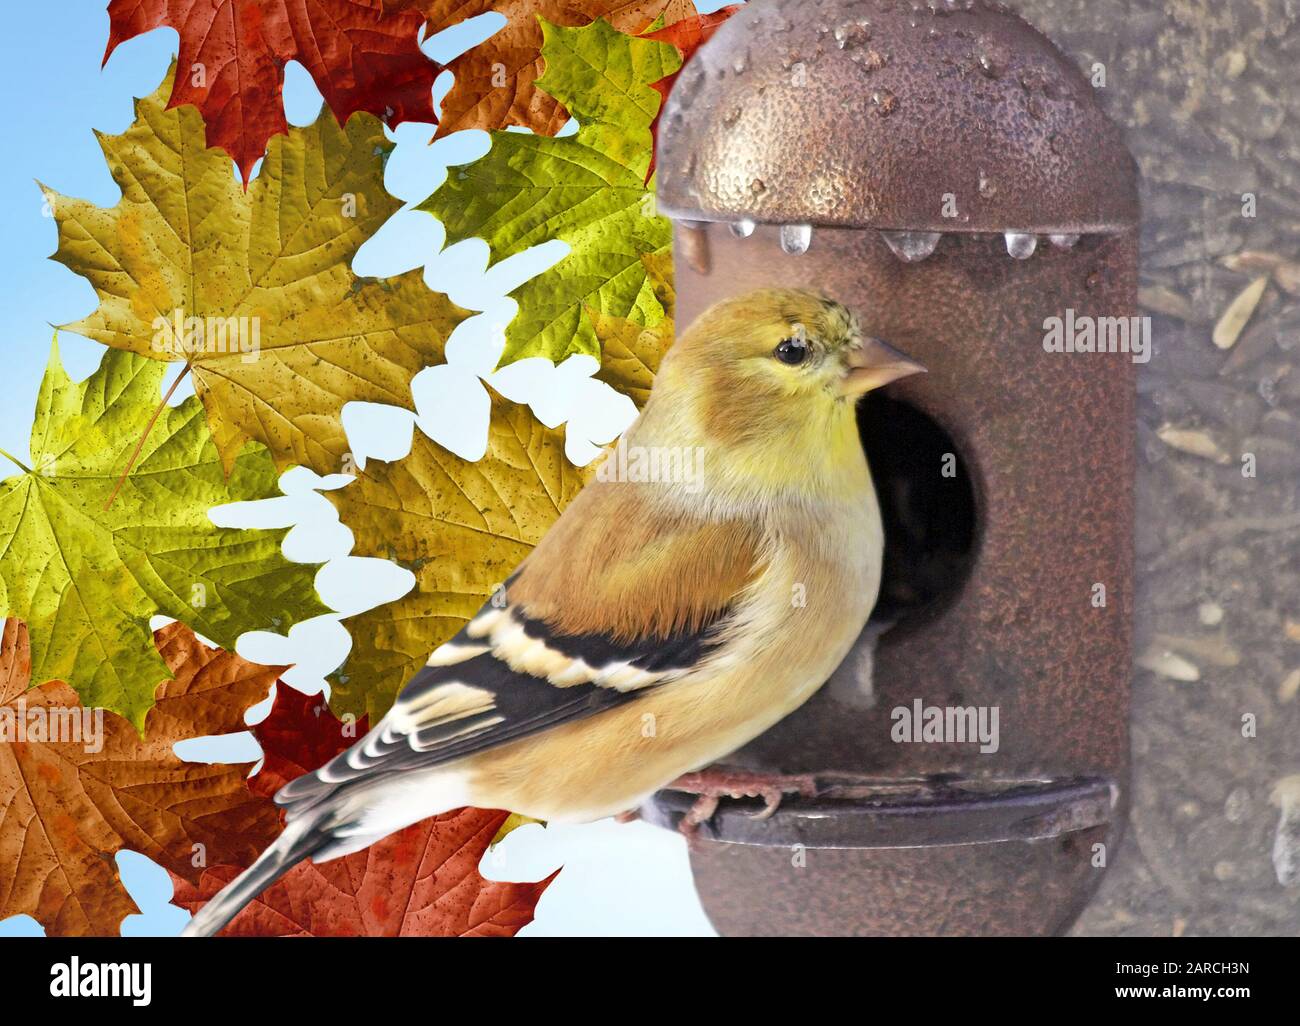 Yellow Finch perched on outdoor metal bird feeder.  Colorful autumn leaves background Stock Photo